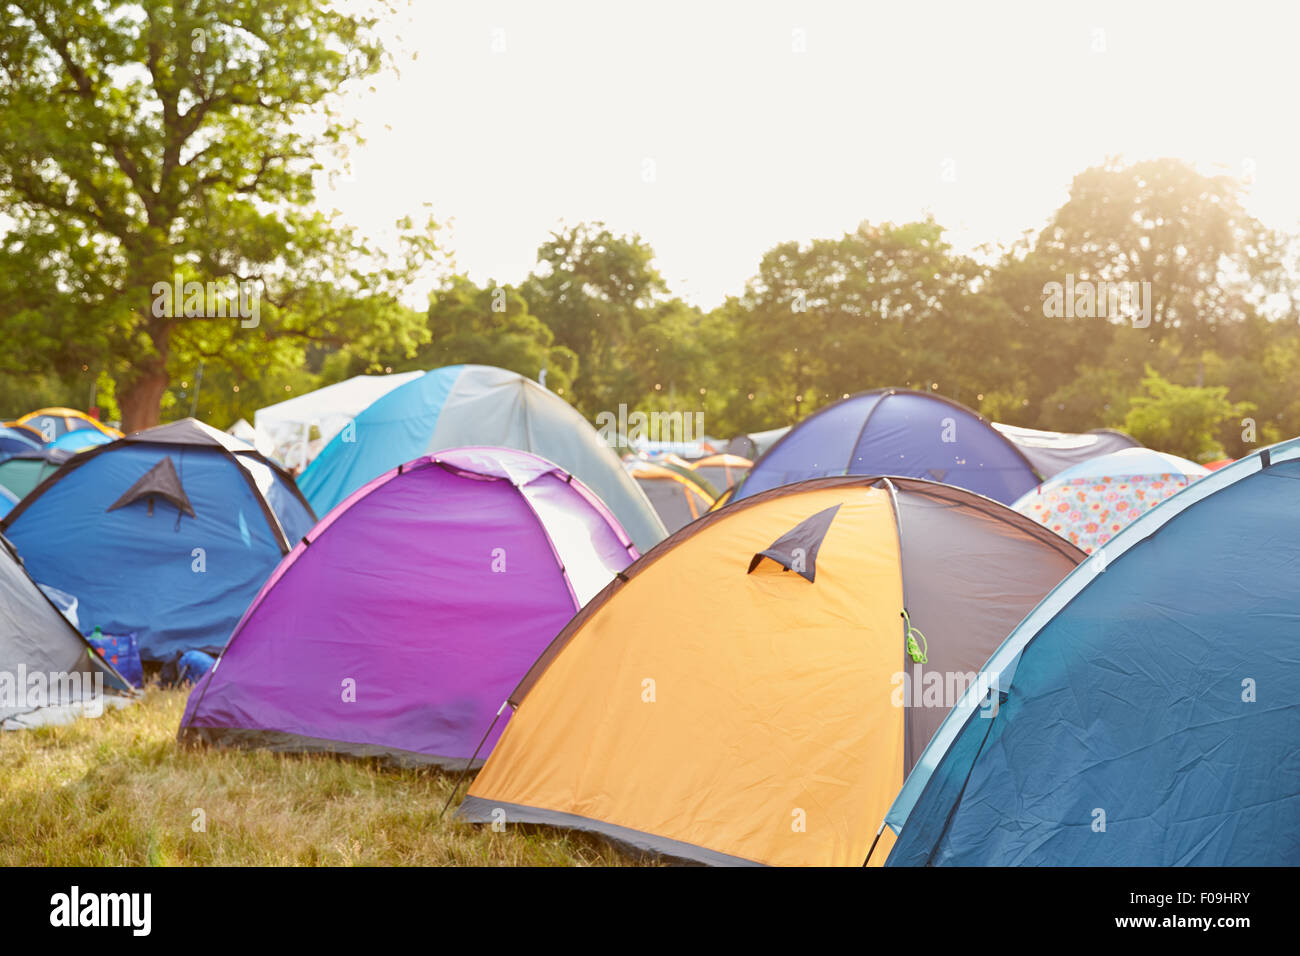 Tents at a music festival campsite Stock Photo